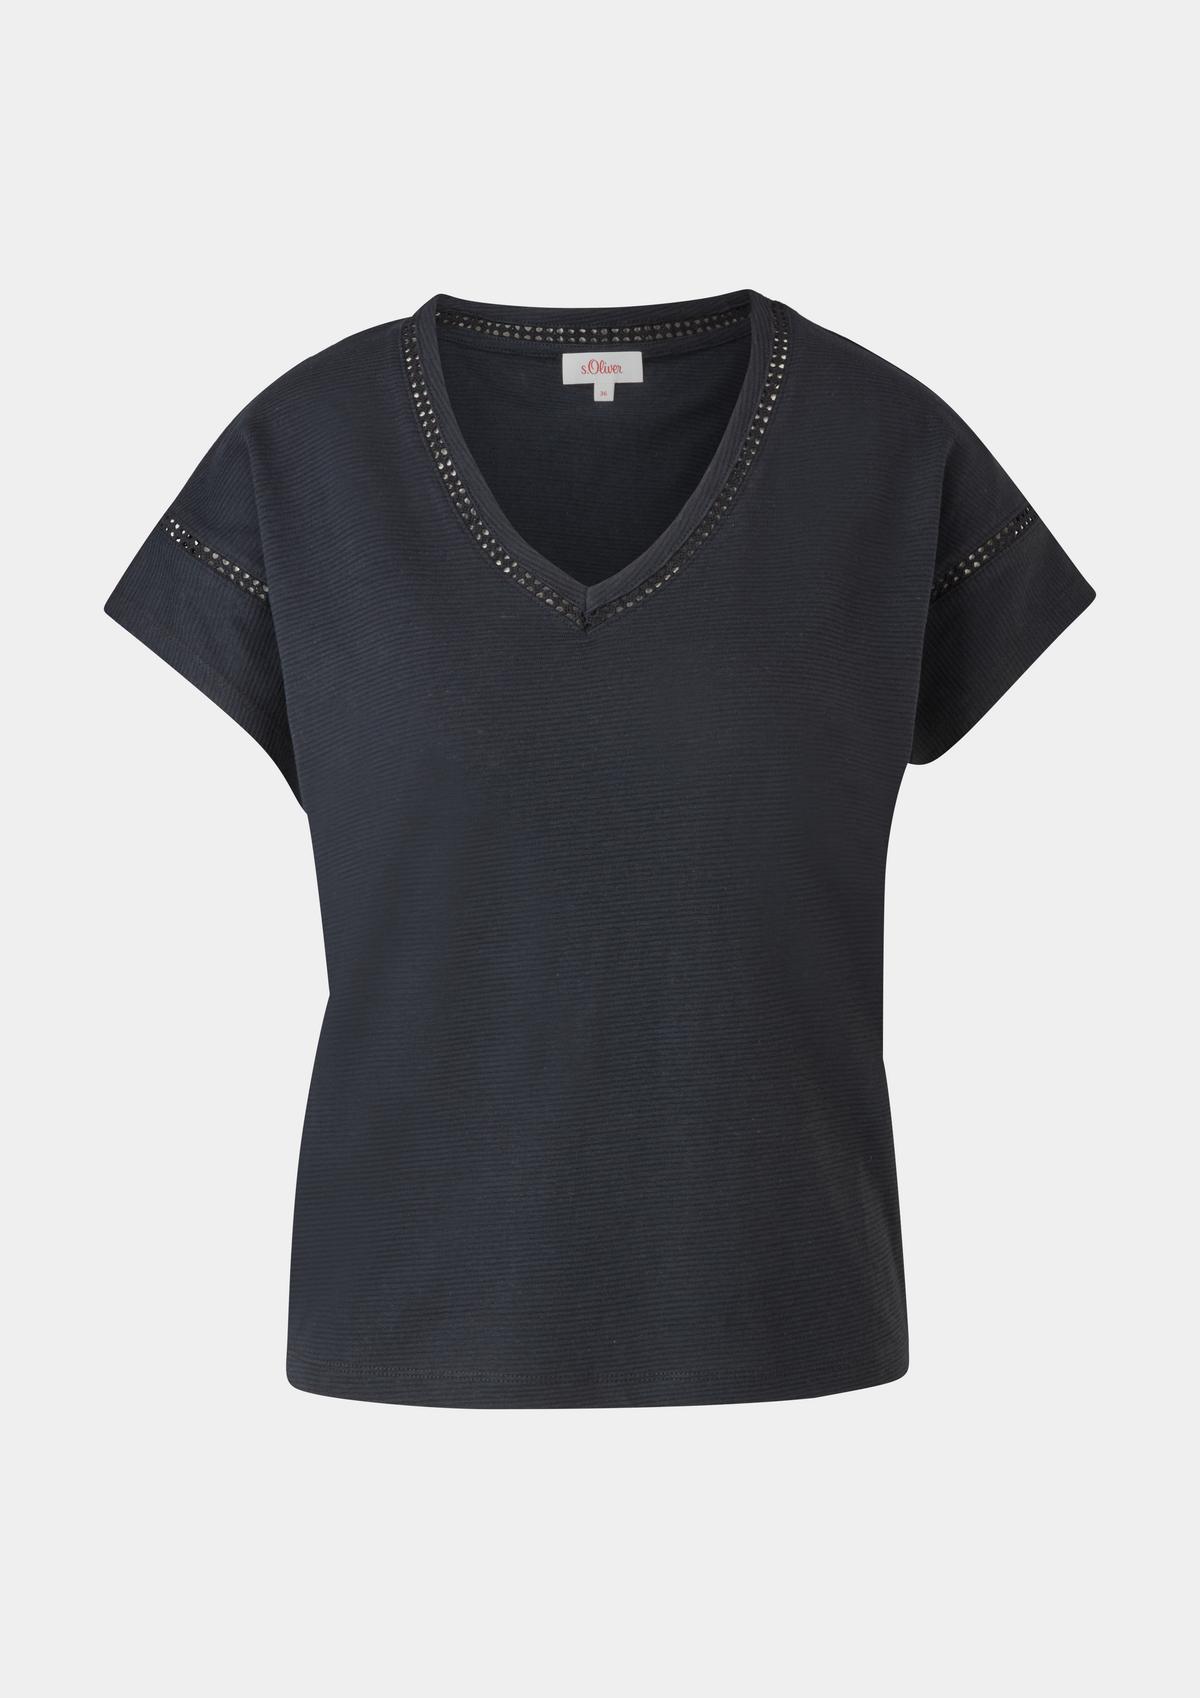 s.Oliver T-shirt with crocheted lace